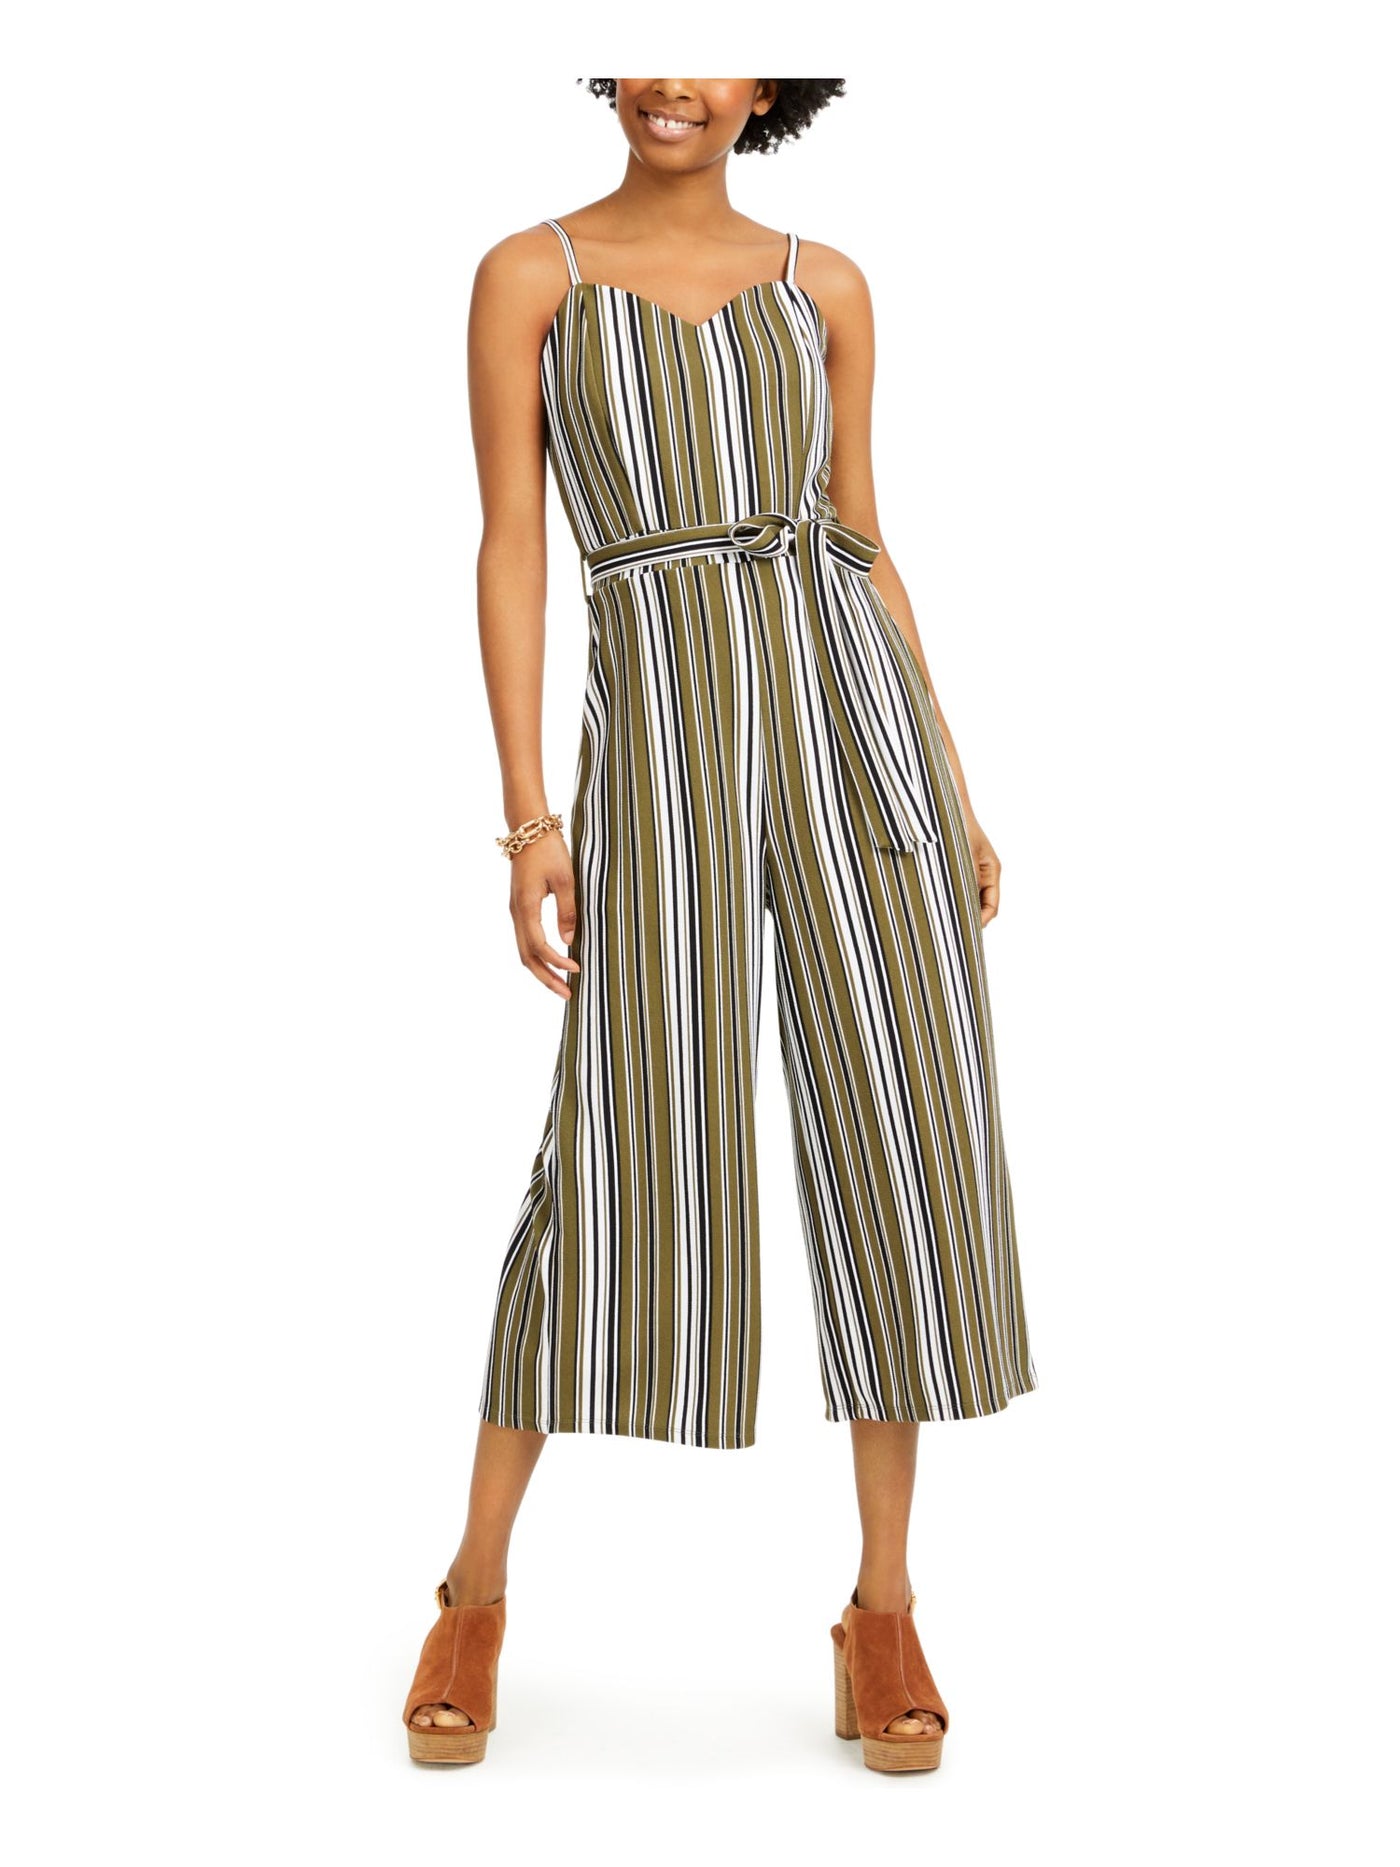 ALMOST FAMOUS Womens Green Belted Striped Spaghetti Strap Sweetheart Neckline Wide Leg Jumpsuit Juniors S